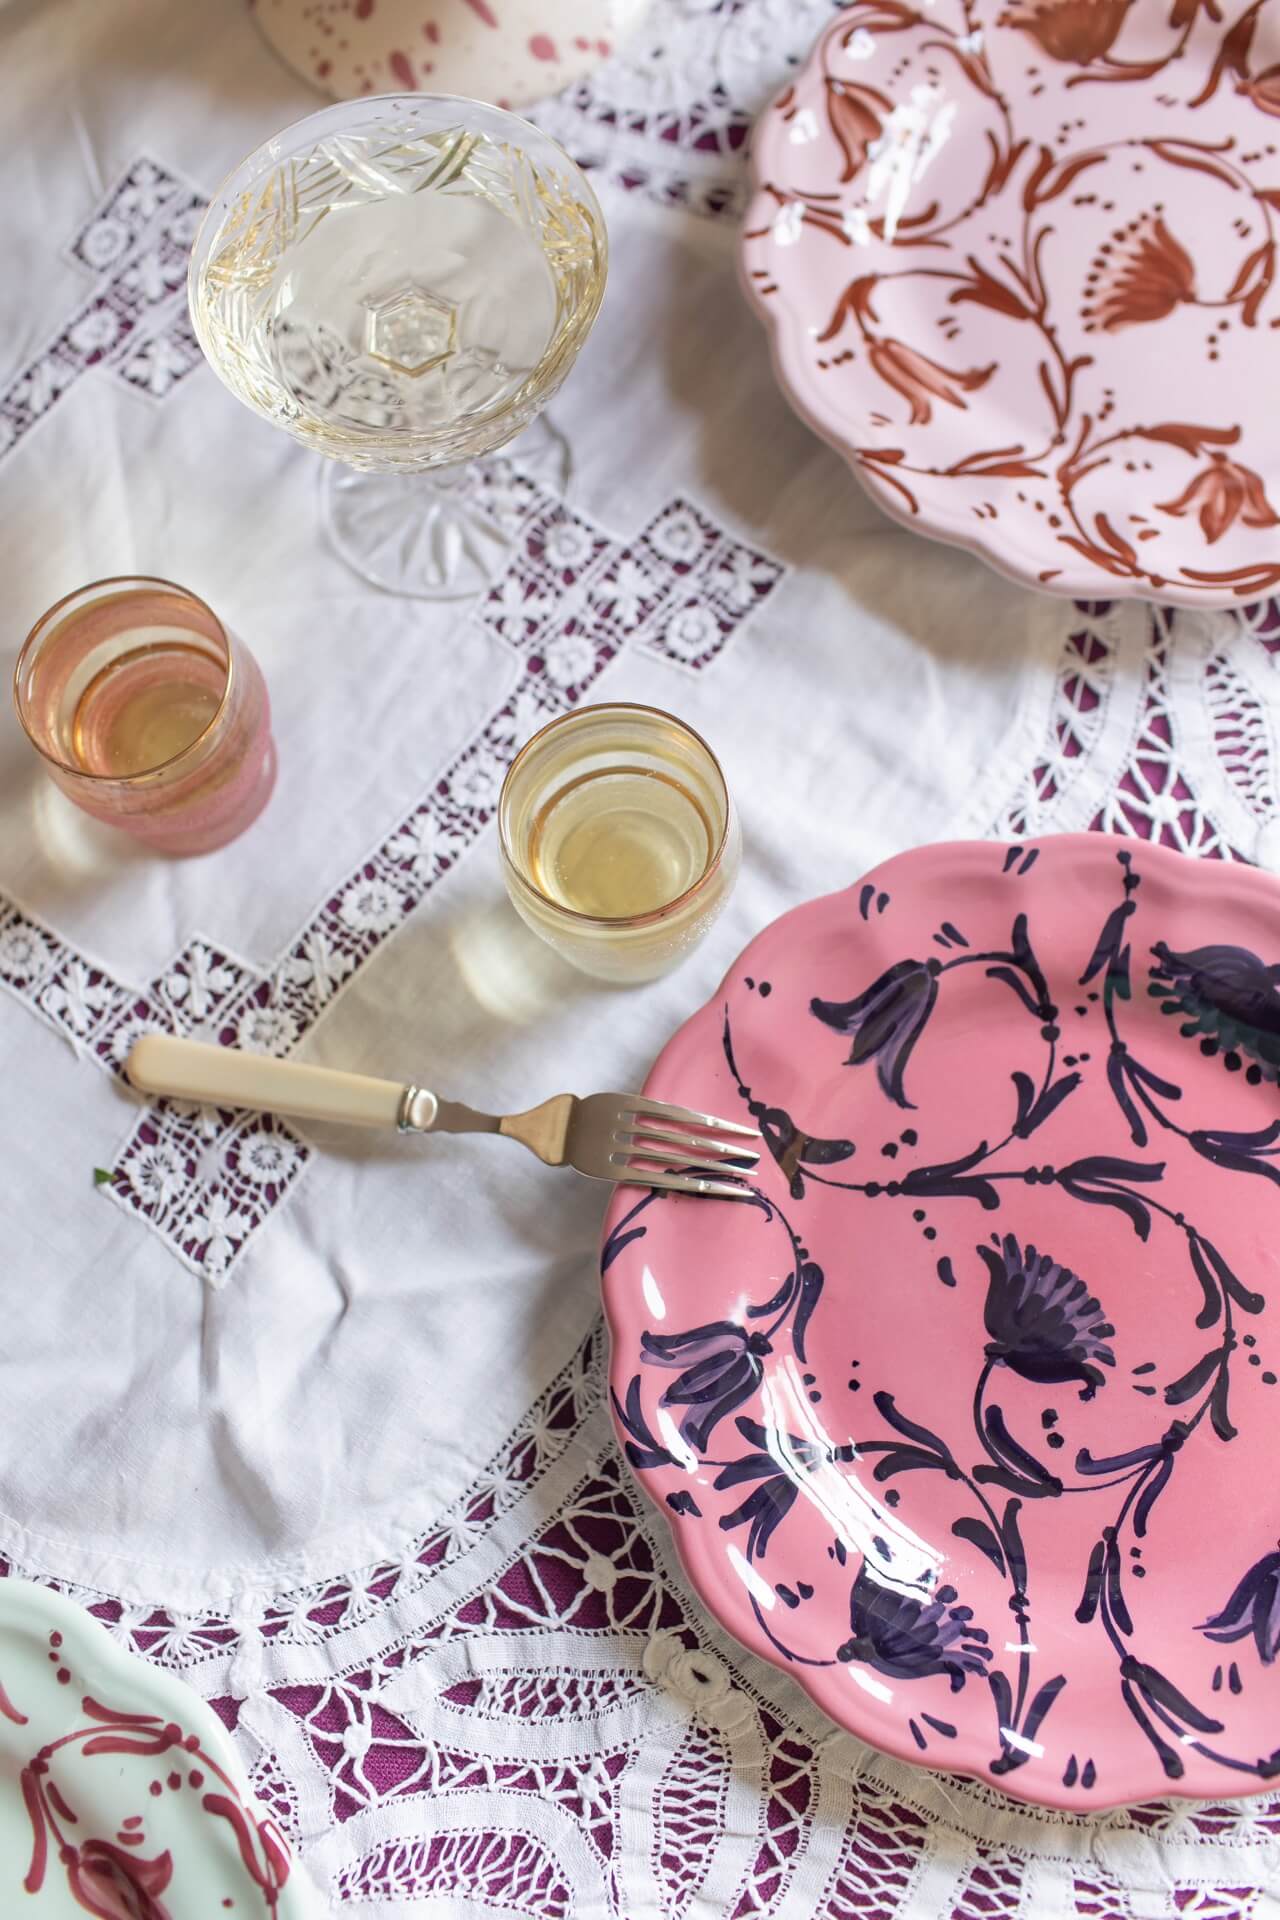 Colourful vintage antique style tableware from independent UK contemporary homeware brand Vaisselle